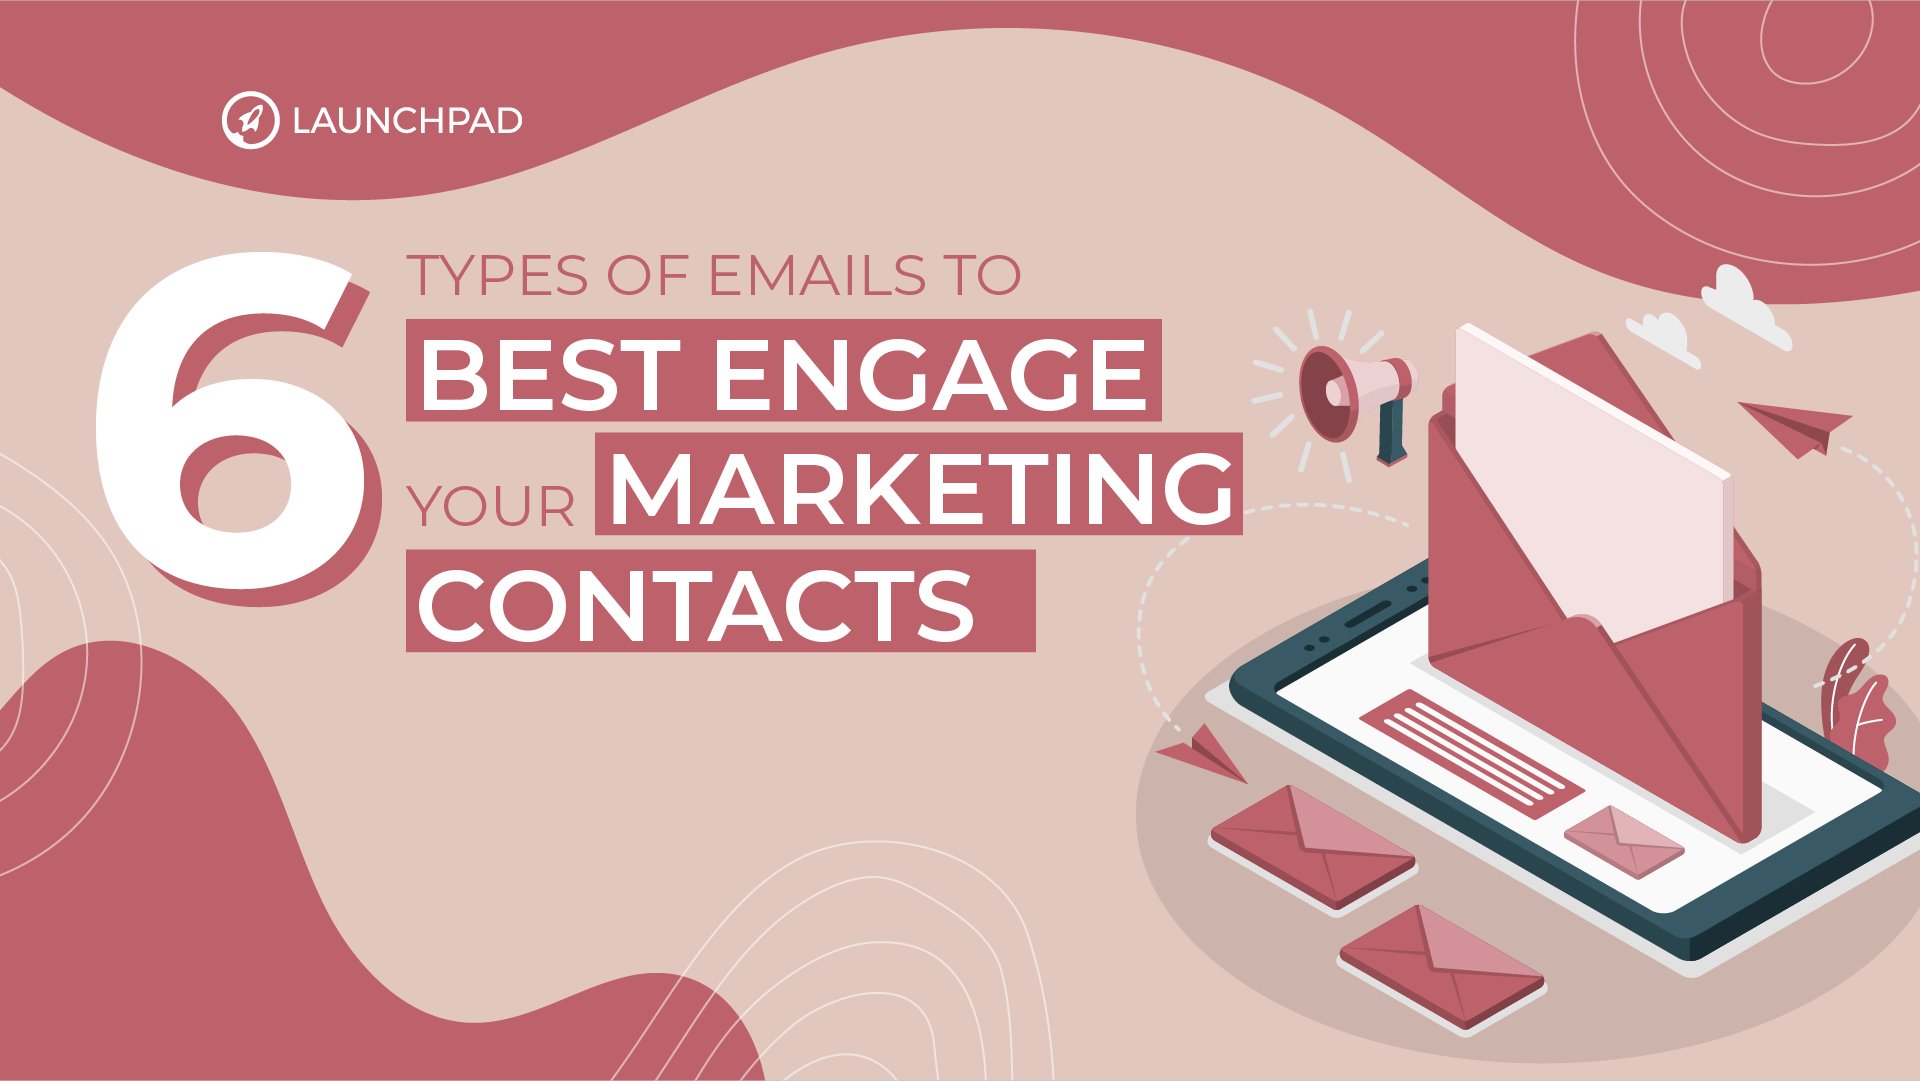 Blog[SM]-56 Types of Emails to Best Engage Your Marketing Contacts-02